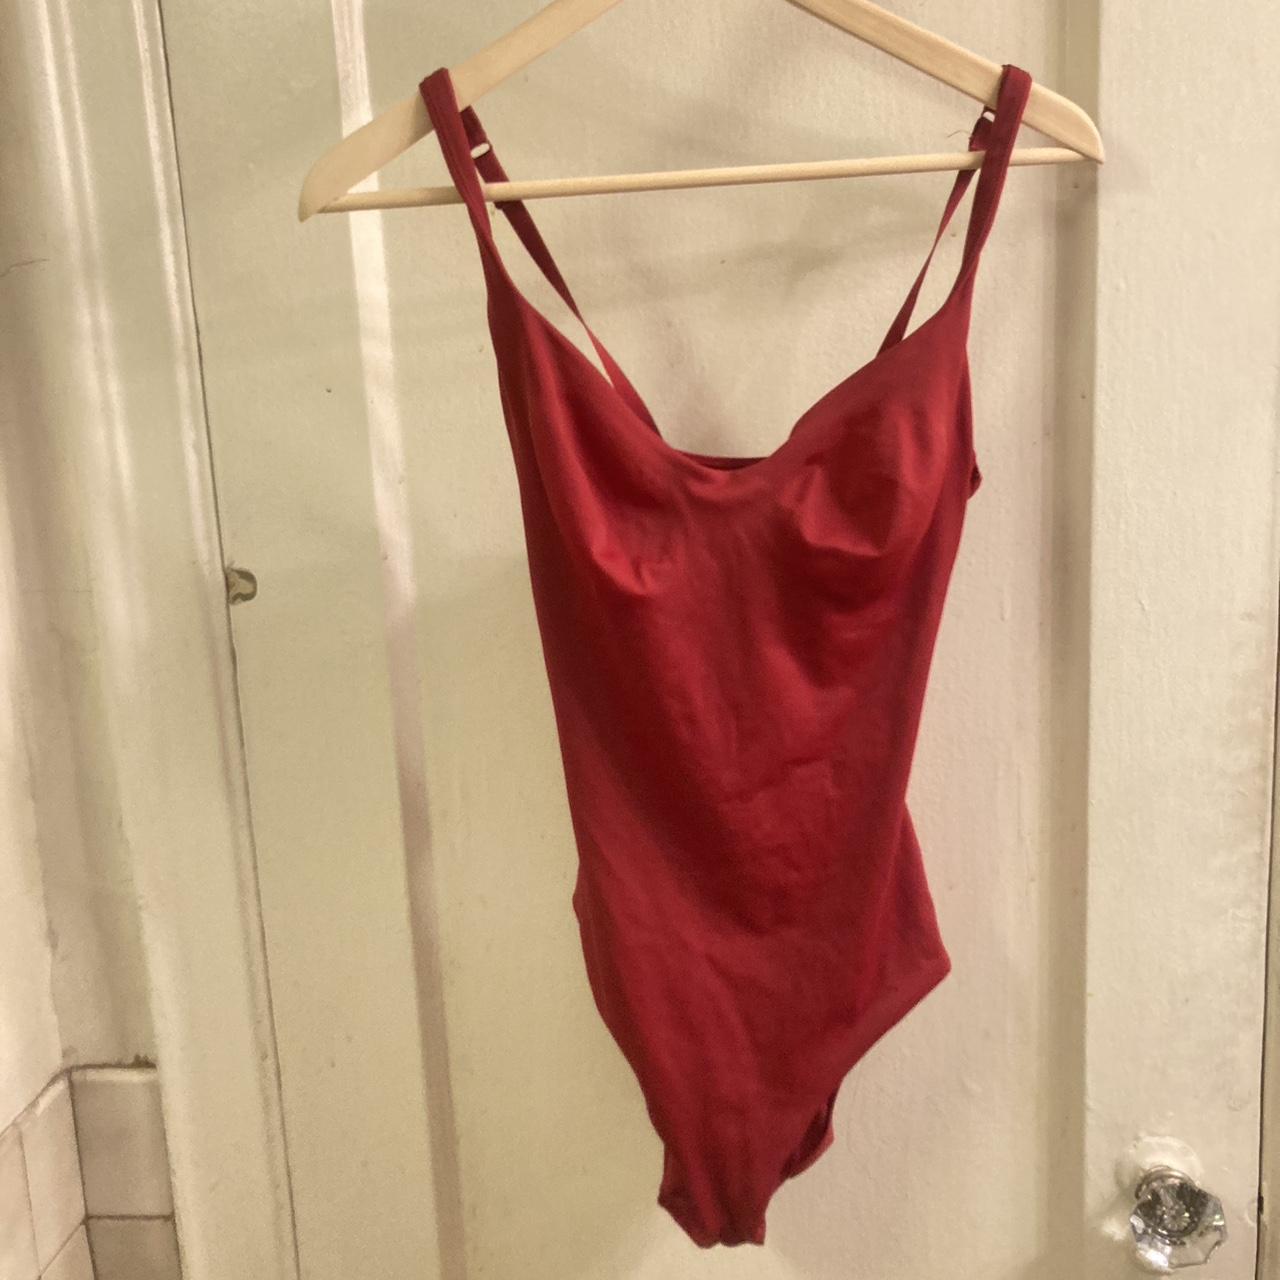 Wolford red body suit! built in bra. the material is